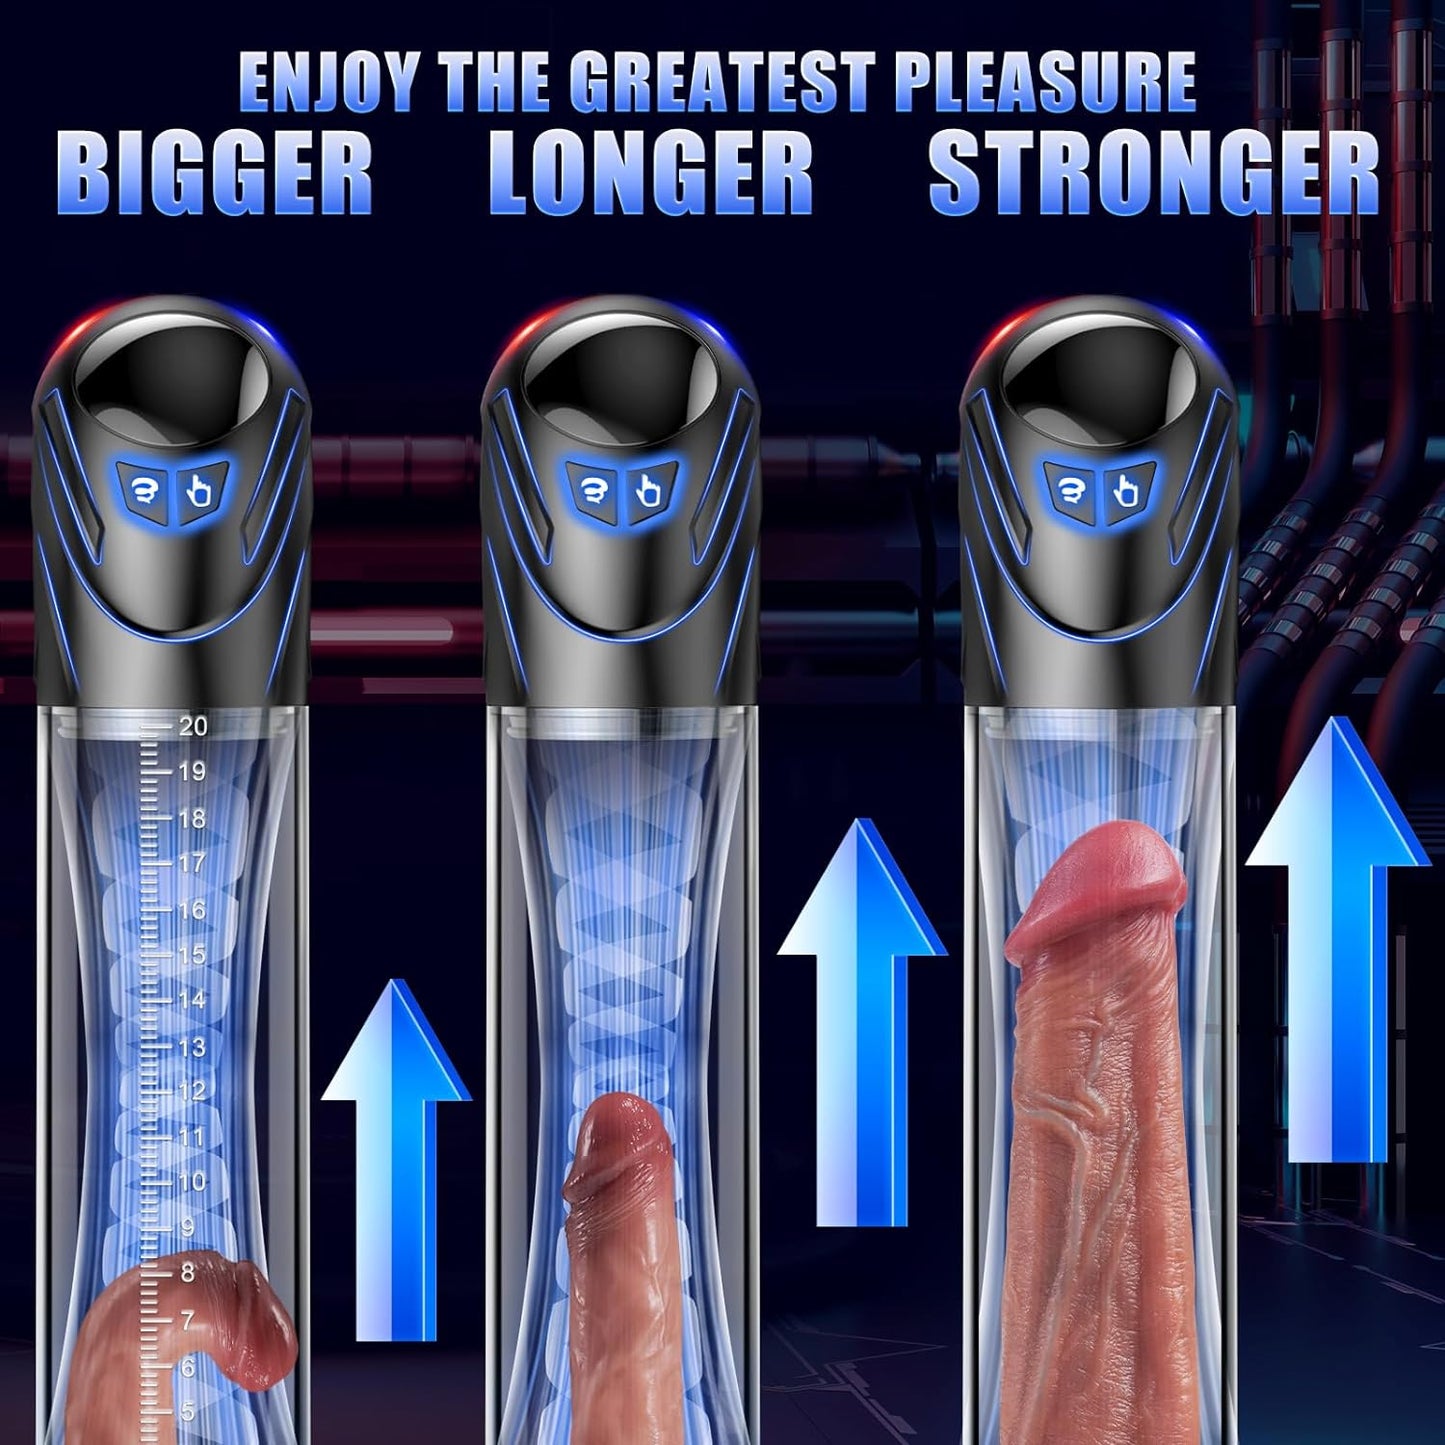 Premium Electric Penis Pump - 5 Suction Modes for Ultimate Pleasure, Penis Enlargement with 2 ED Cock Rings, Ideal for Men and Couples